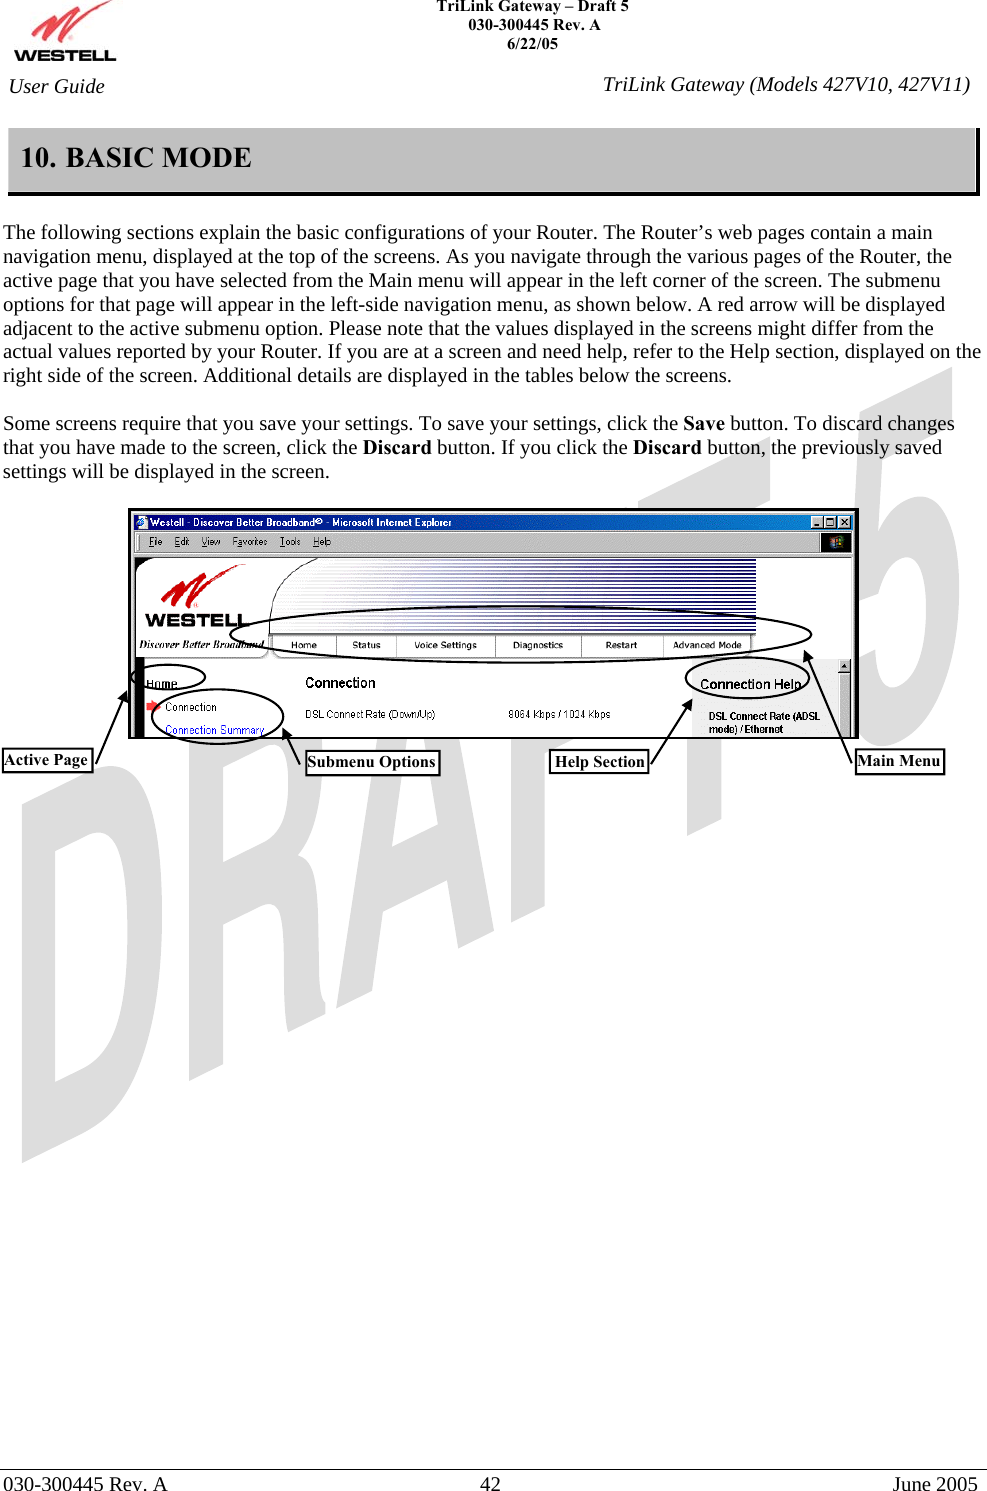    TriLink Gateway – Draft 5   030-300445 Rev. A 6/22/05   030-300445 Rev. A  42  June 2005  User Guide  TriLink Gateway (Models 427V10, 427V11)10. BASIC MODE  The following sections explain the basic configurations of your Router. The Router’s web pages contain a main navigation menu, displayed at the top of the screens. As you navigate through the various pages of the Router, the active page that you have selected from the Main menu will appear in the left corner of the screen. The submenu options for that page will appear in the left-side navigation menu, as shown below. A red arrow will be displayed adjacent to the active submenu option. Please note that the values displayed in the screens might differ from the actual values reported by your Router. If you are at a screen and need help, refer to the Help section, displayed on the right side of the screen. Additional details are displayed in the tables below the screens.  Some screens require that you save your settings. To save your settings, click the Save button. To discard changes that you have made to the screen, click the Discard button. If you click the Discard button, the previously saved settings will be displayed in the screen.        Main Menu Help SectionActive Page  Submenu Options